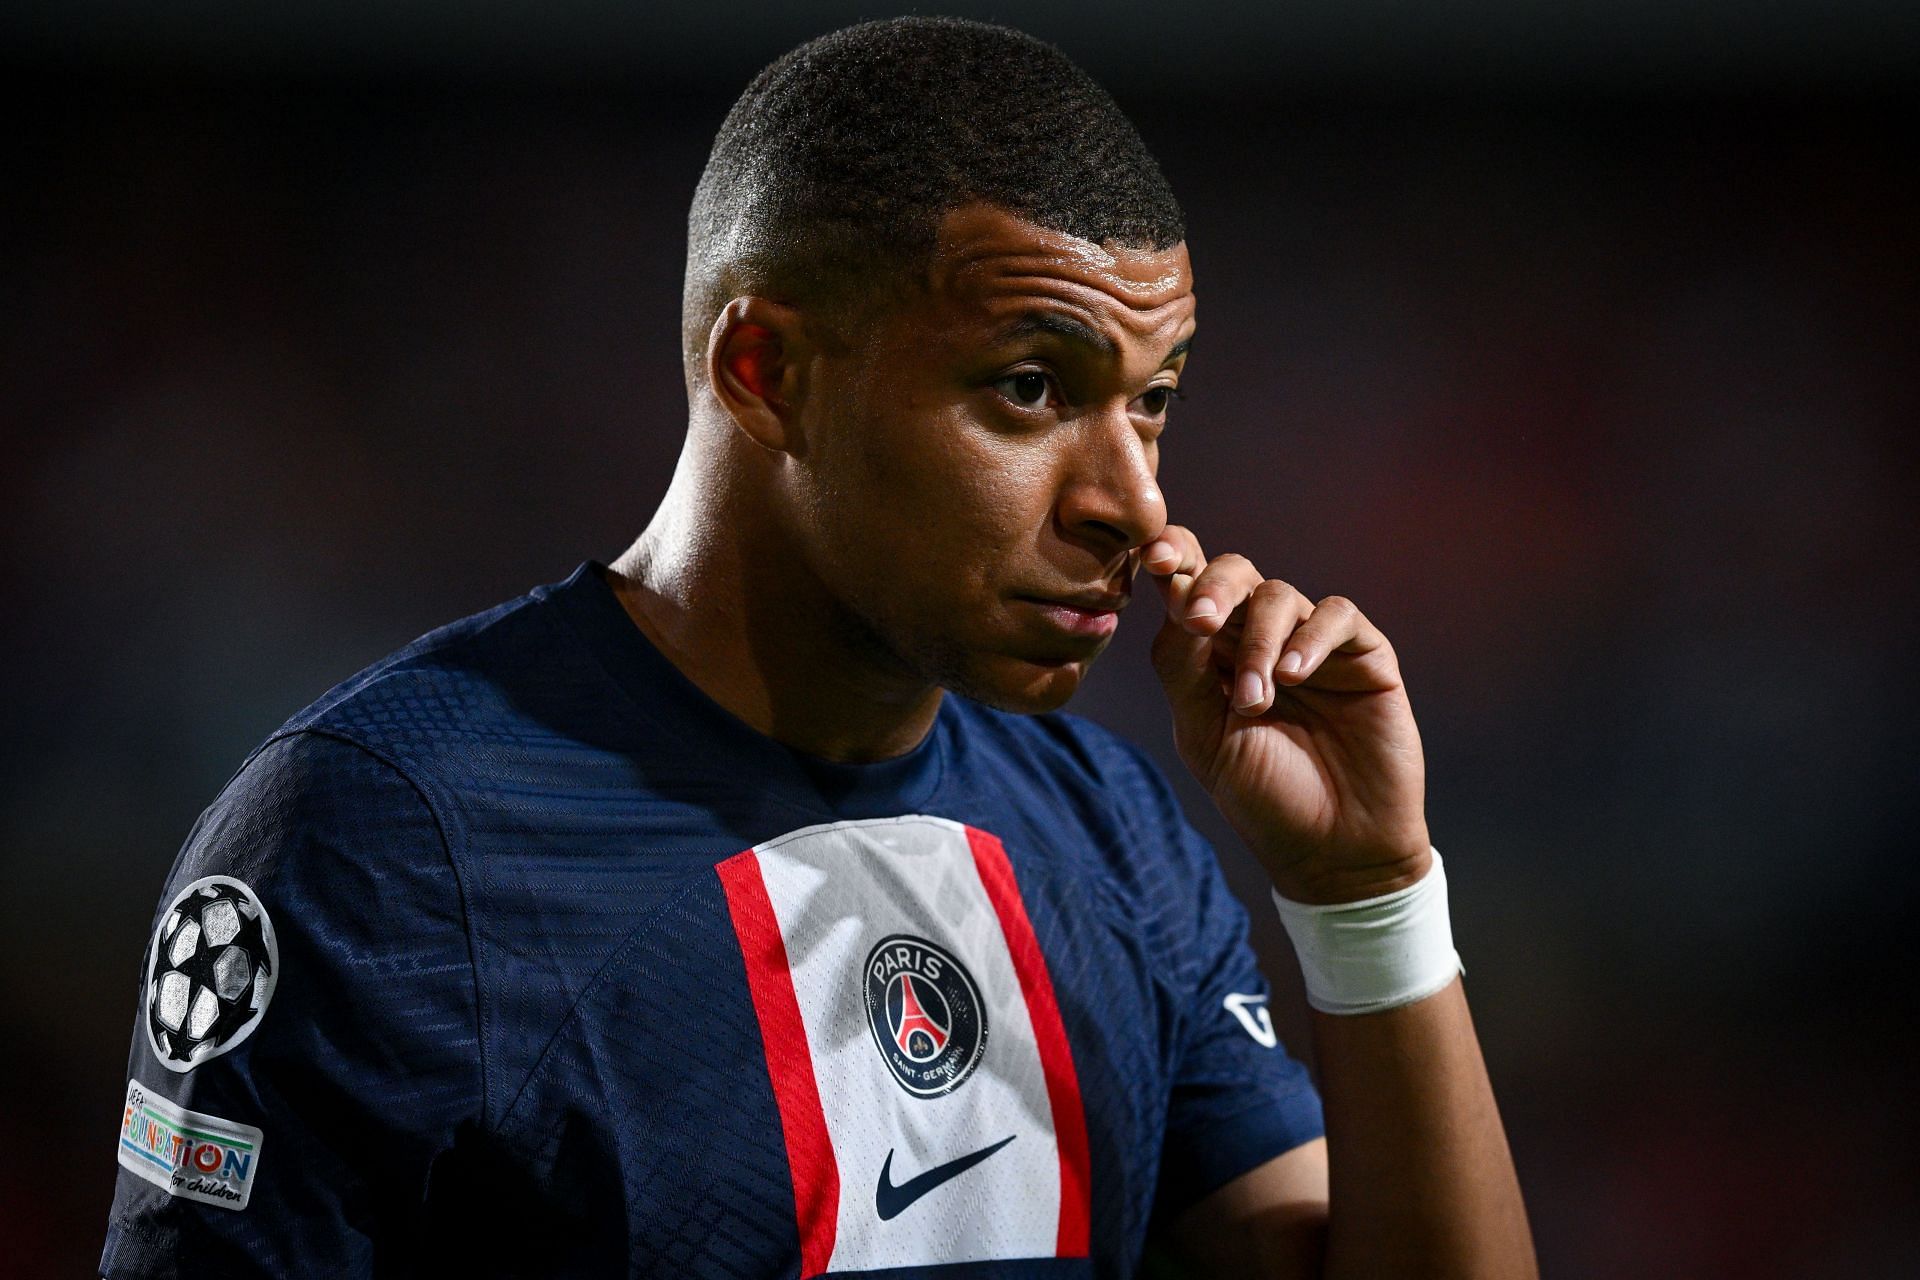 Kylian Mbappe can feel the fury of the Parc des Princes